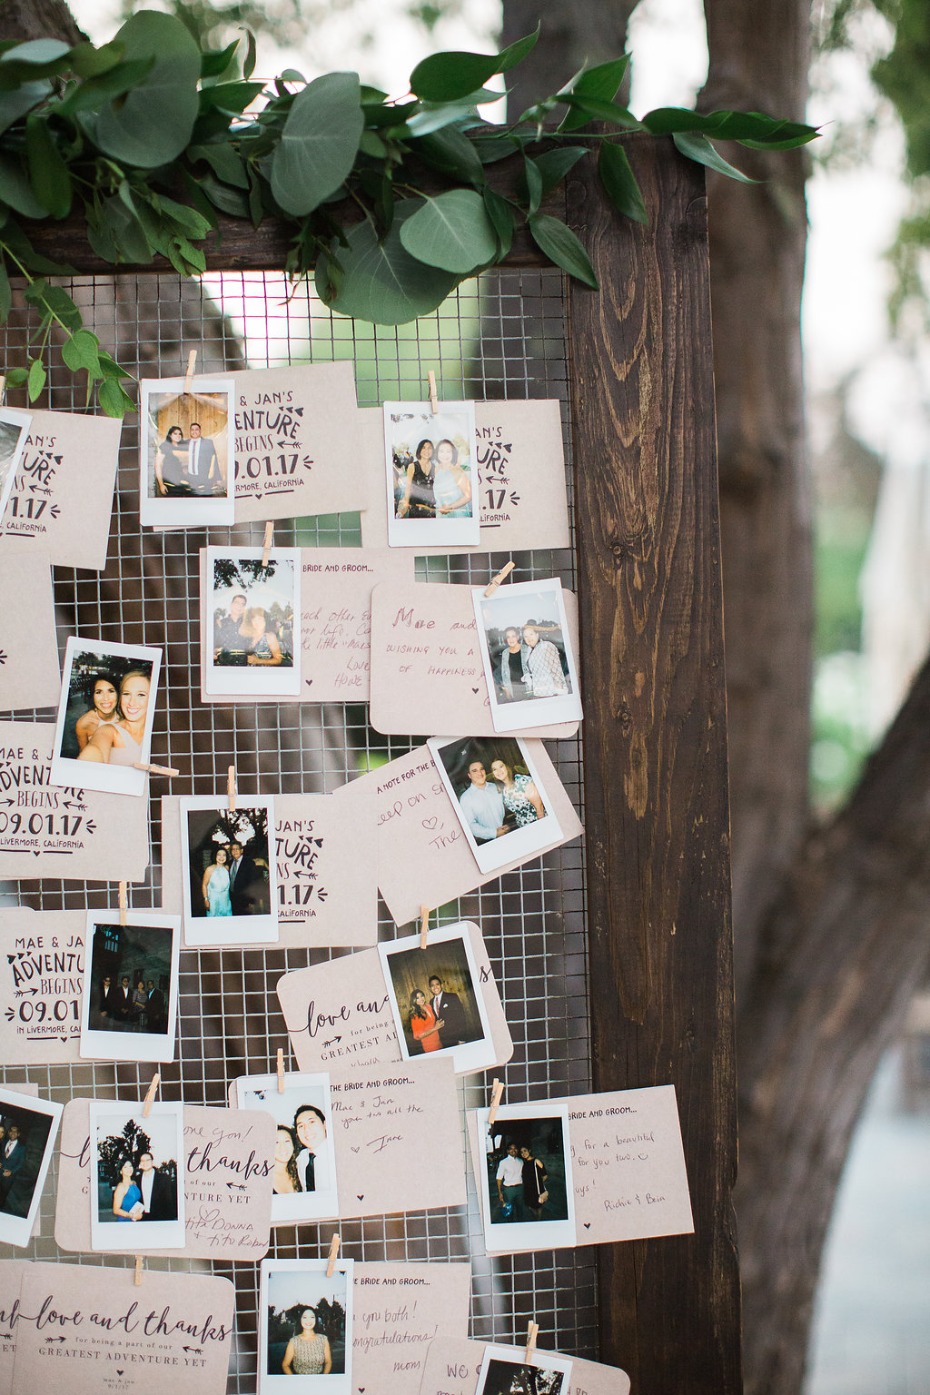 Polaroid guest book with notes